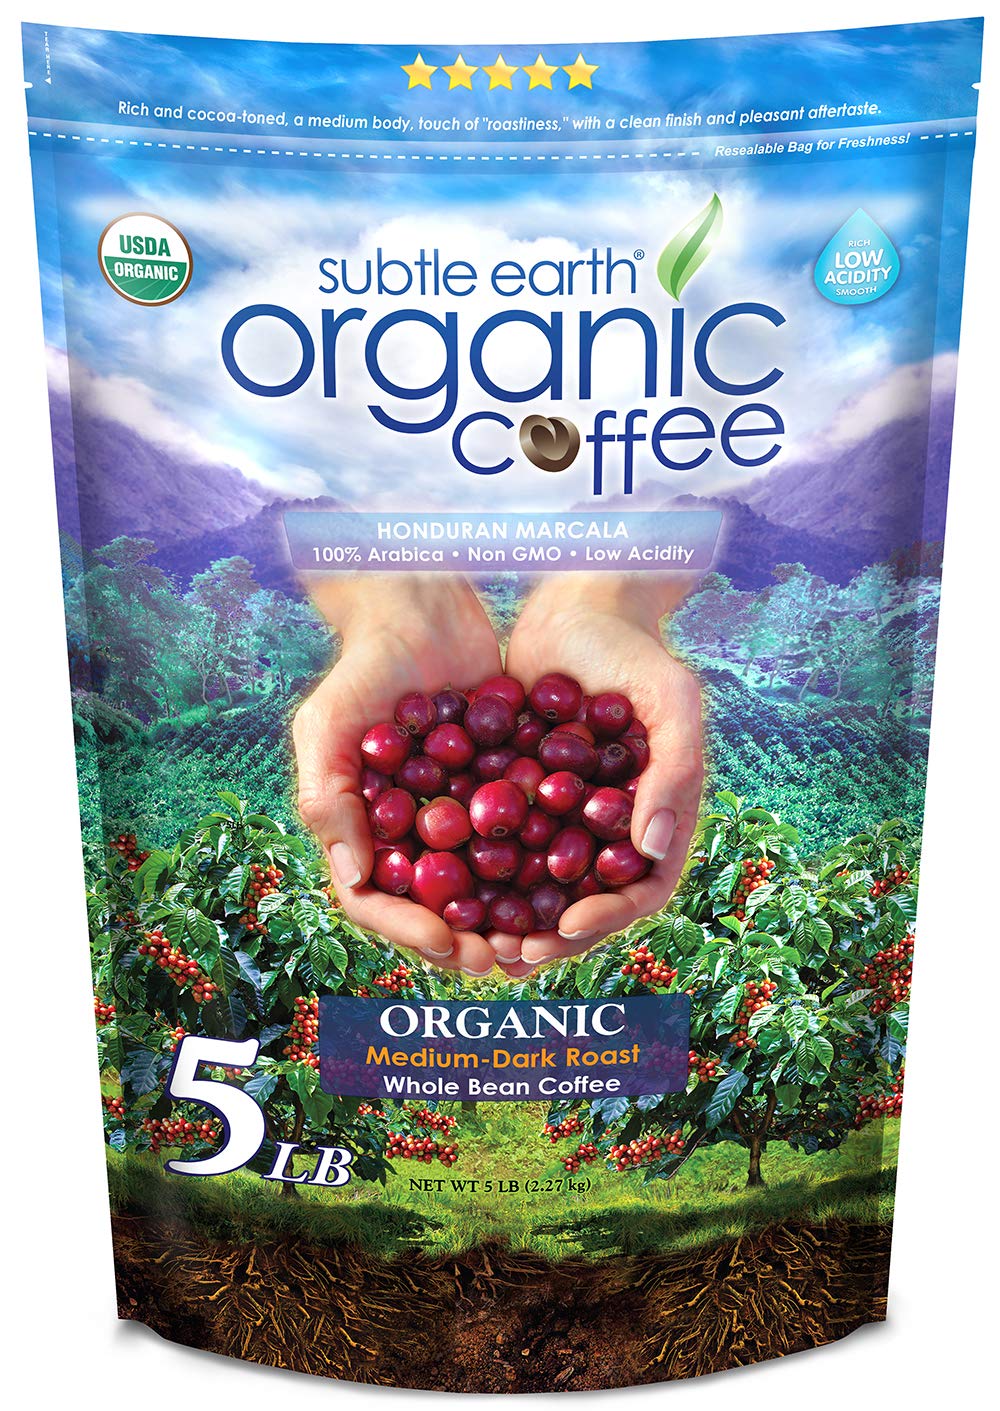 What Is the Best Organic Coffee Brands?